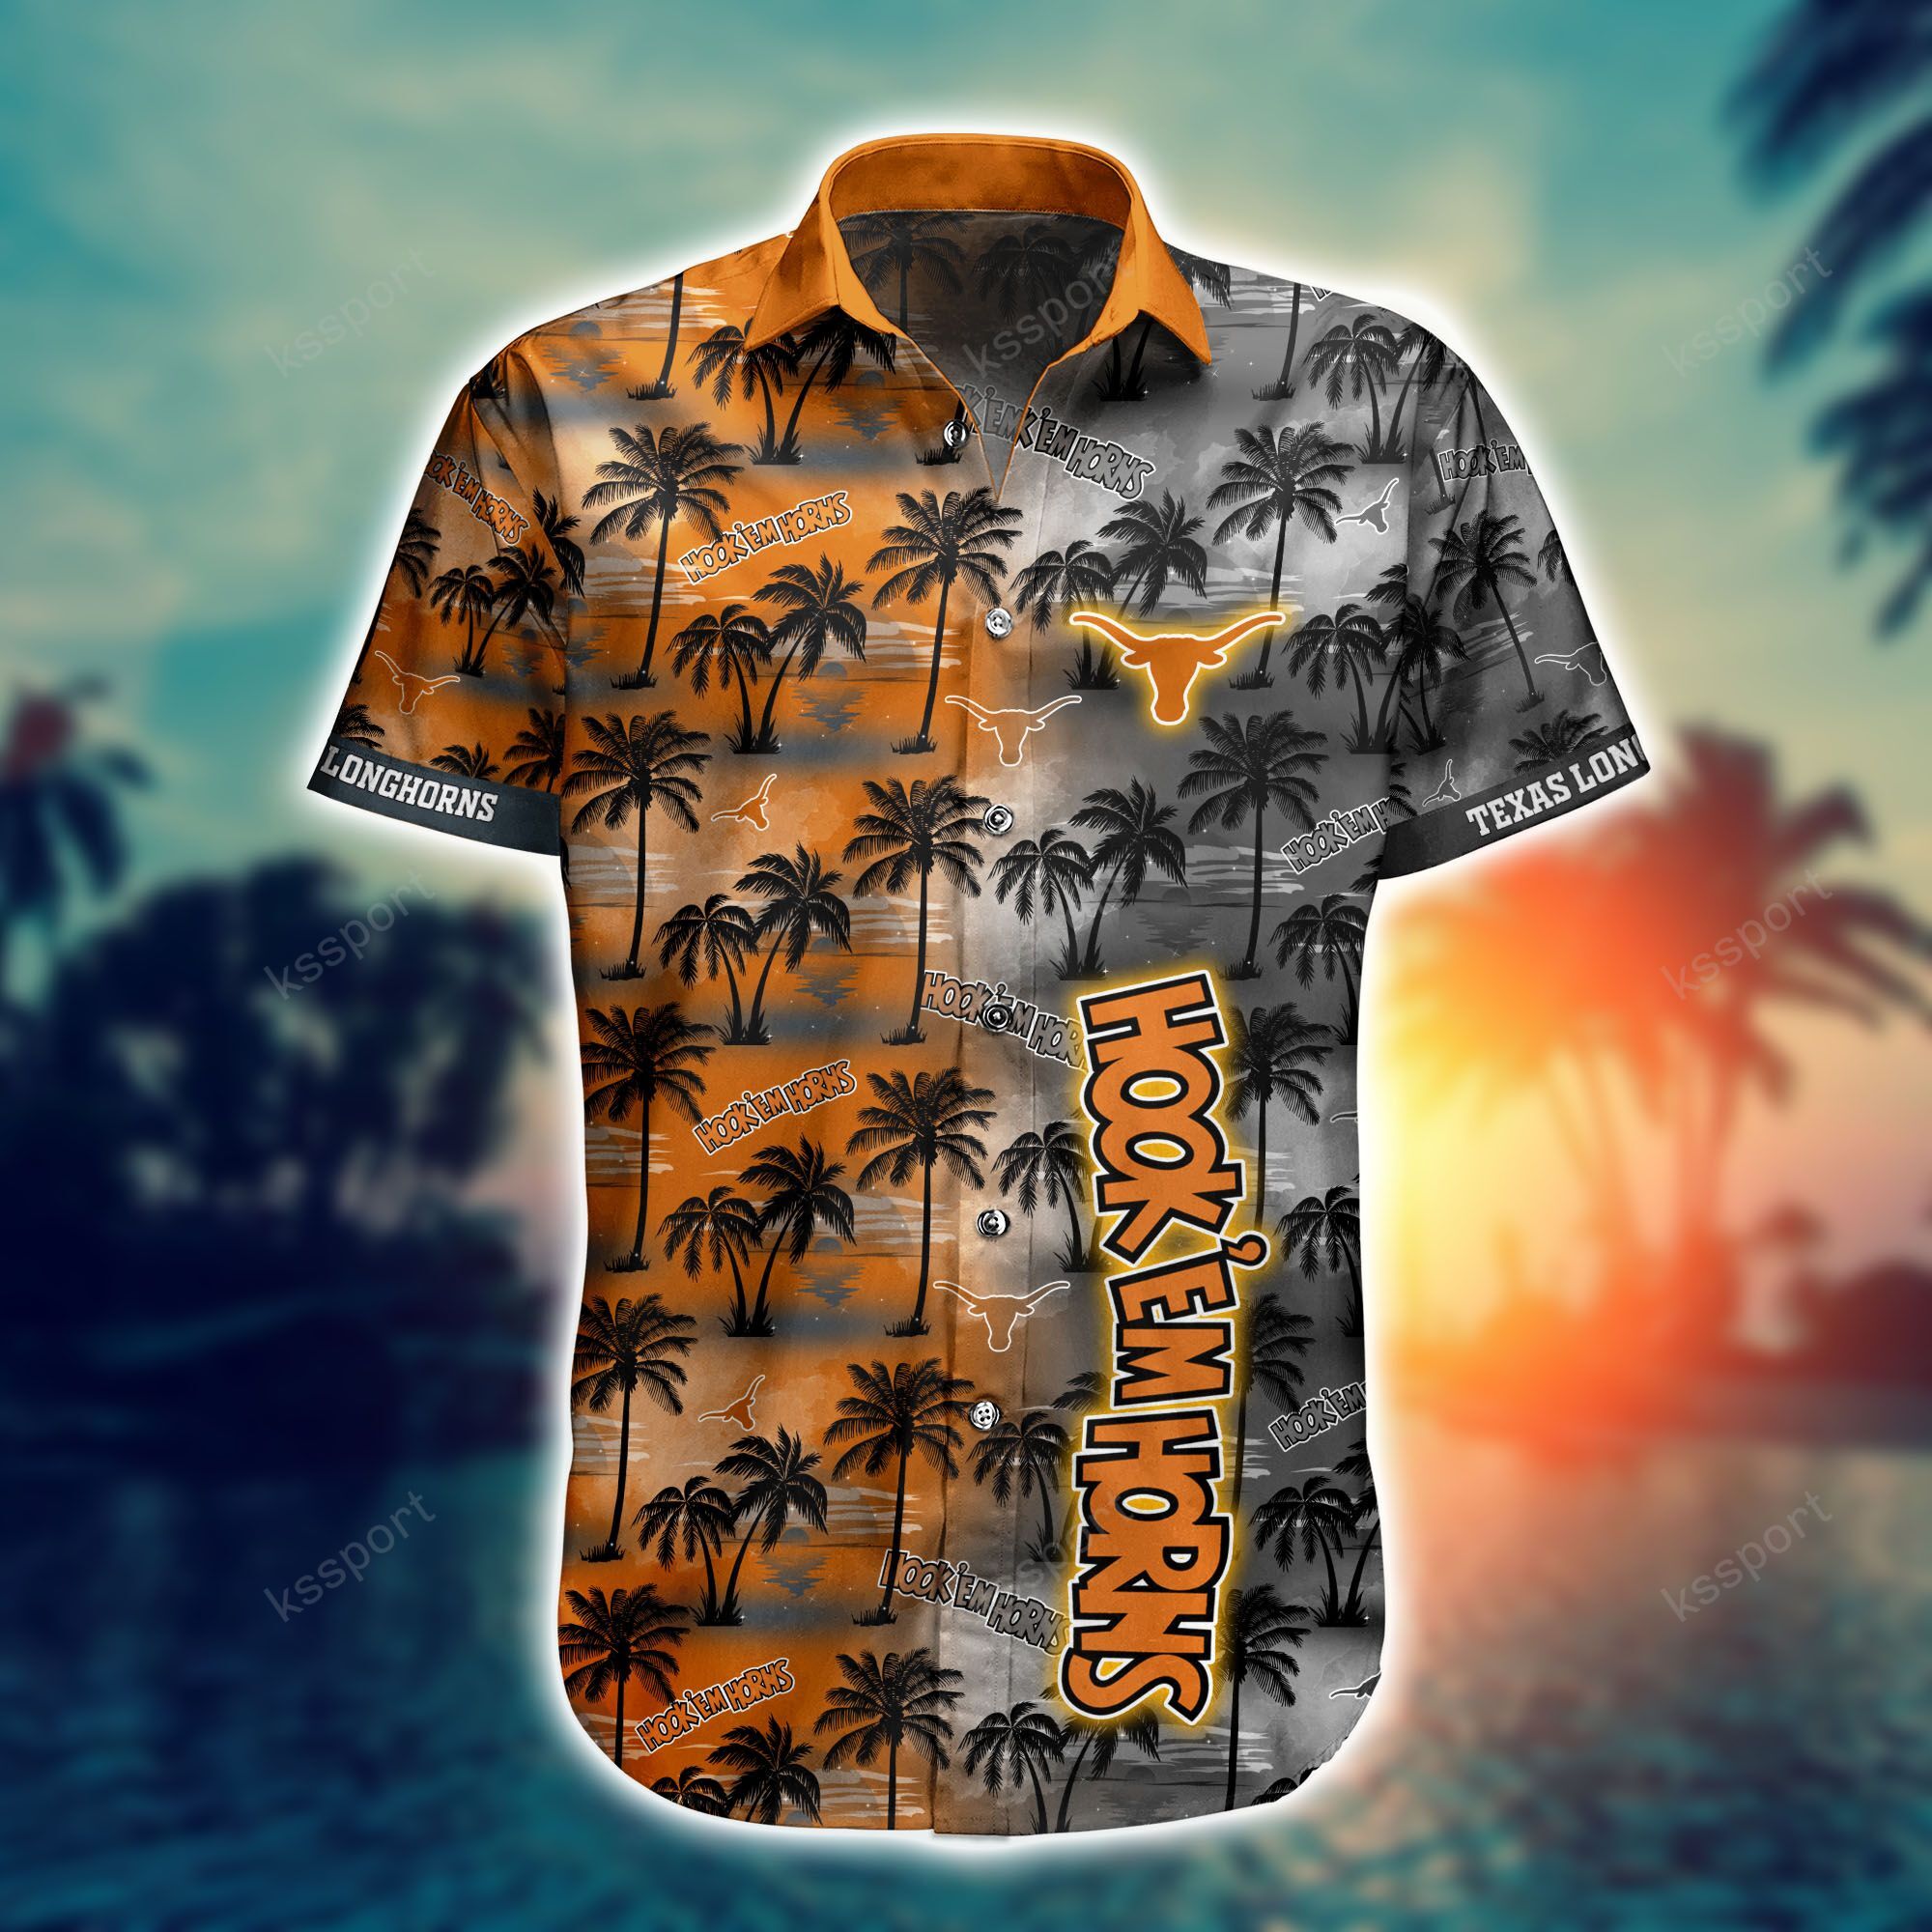 Top cool Hawaiian shirt 2022 - Make sure you get yours today before they run out! 177